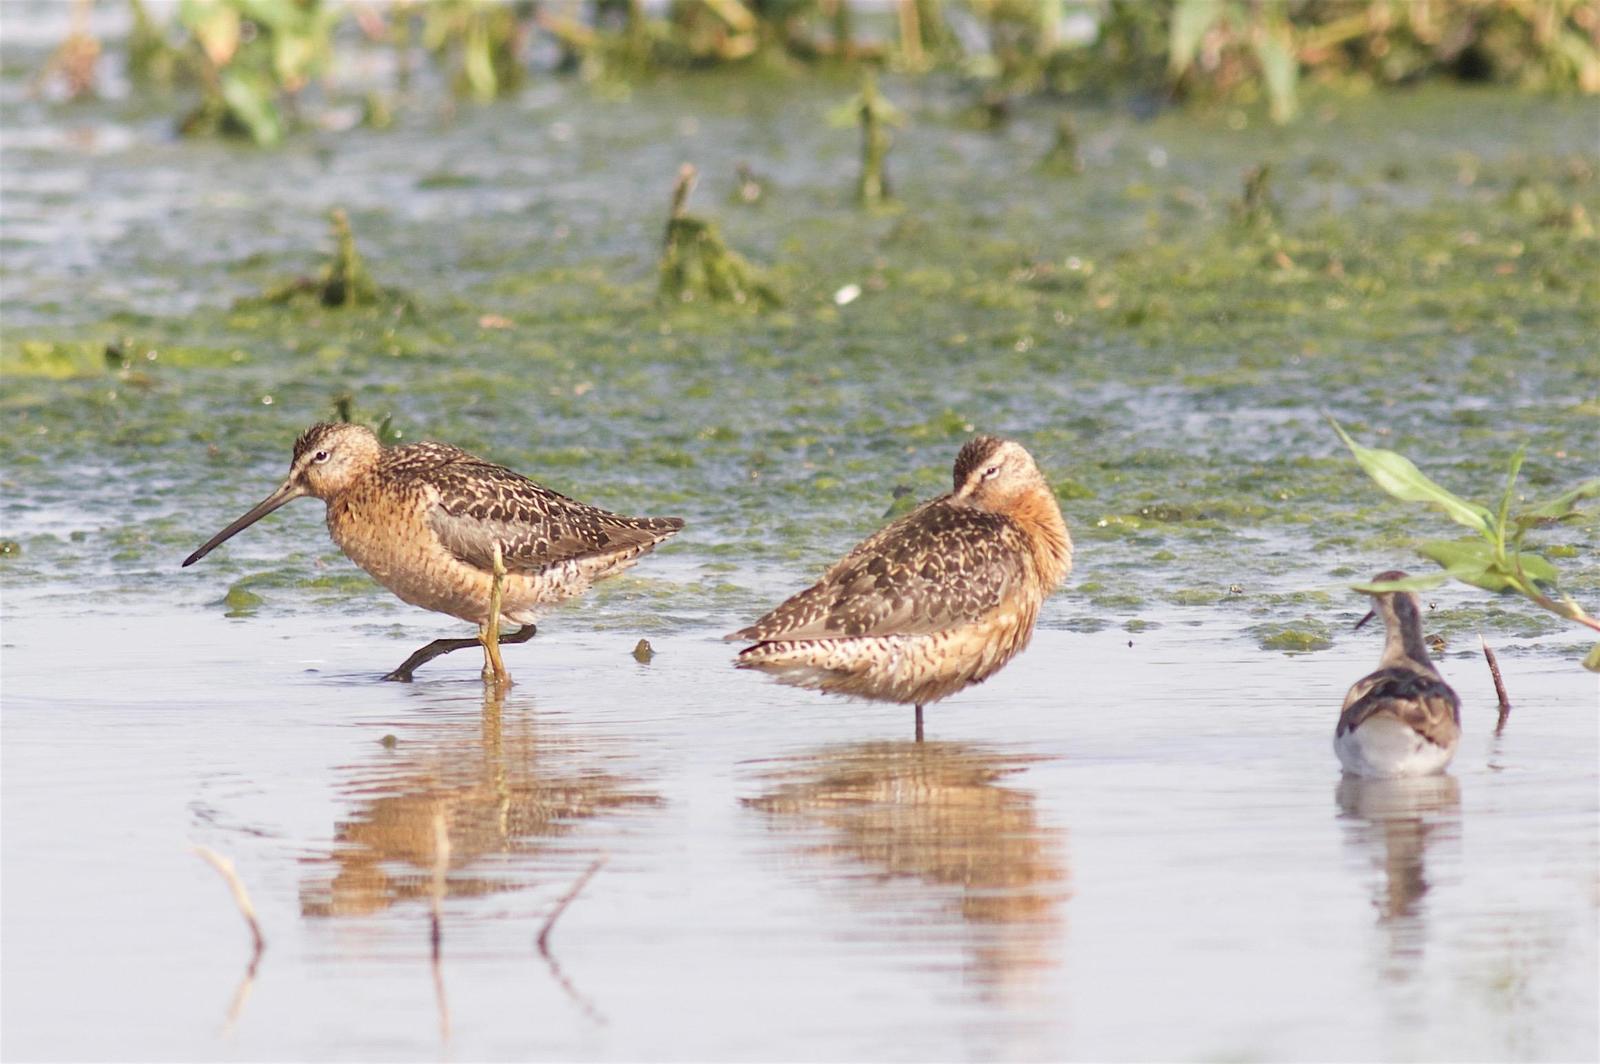 Long-billed Dowitcher Photo by Kathryn Keith